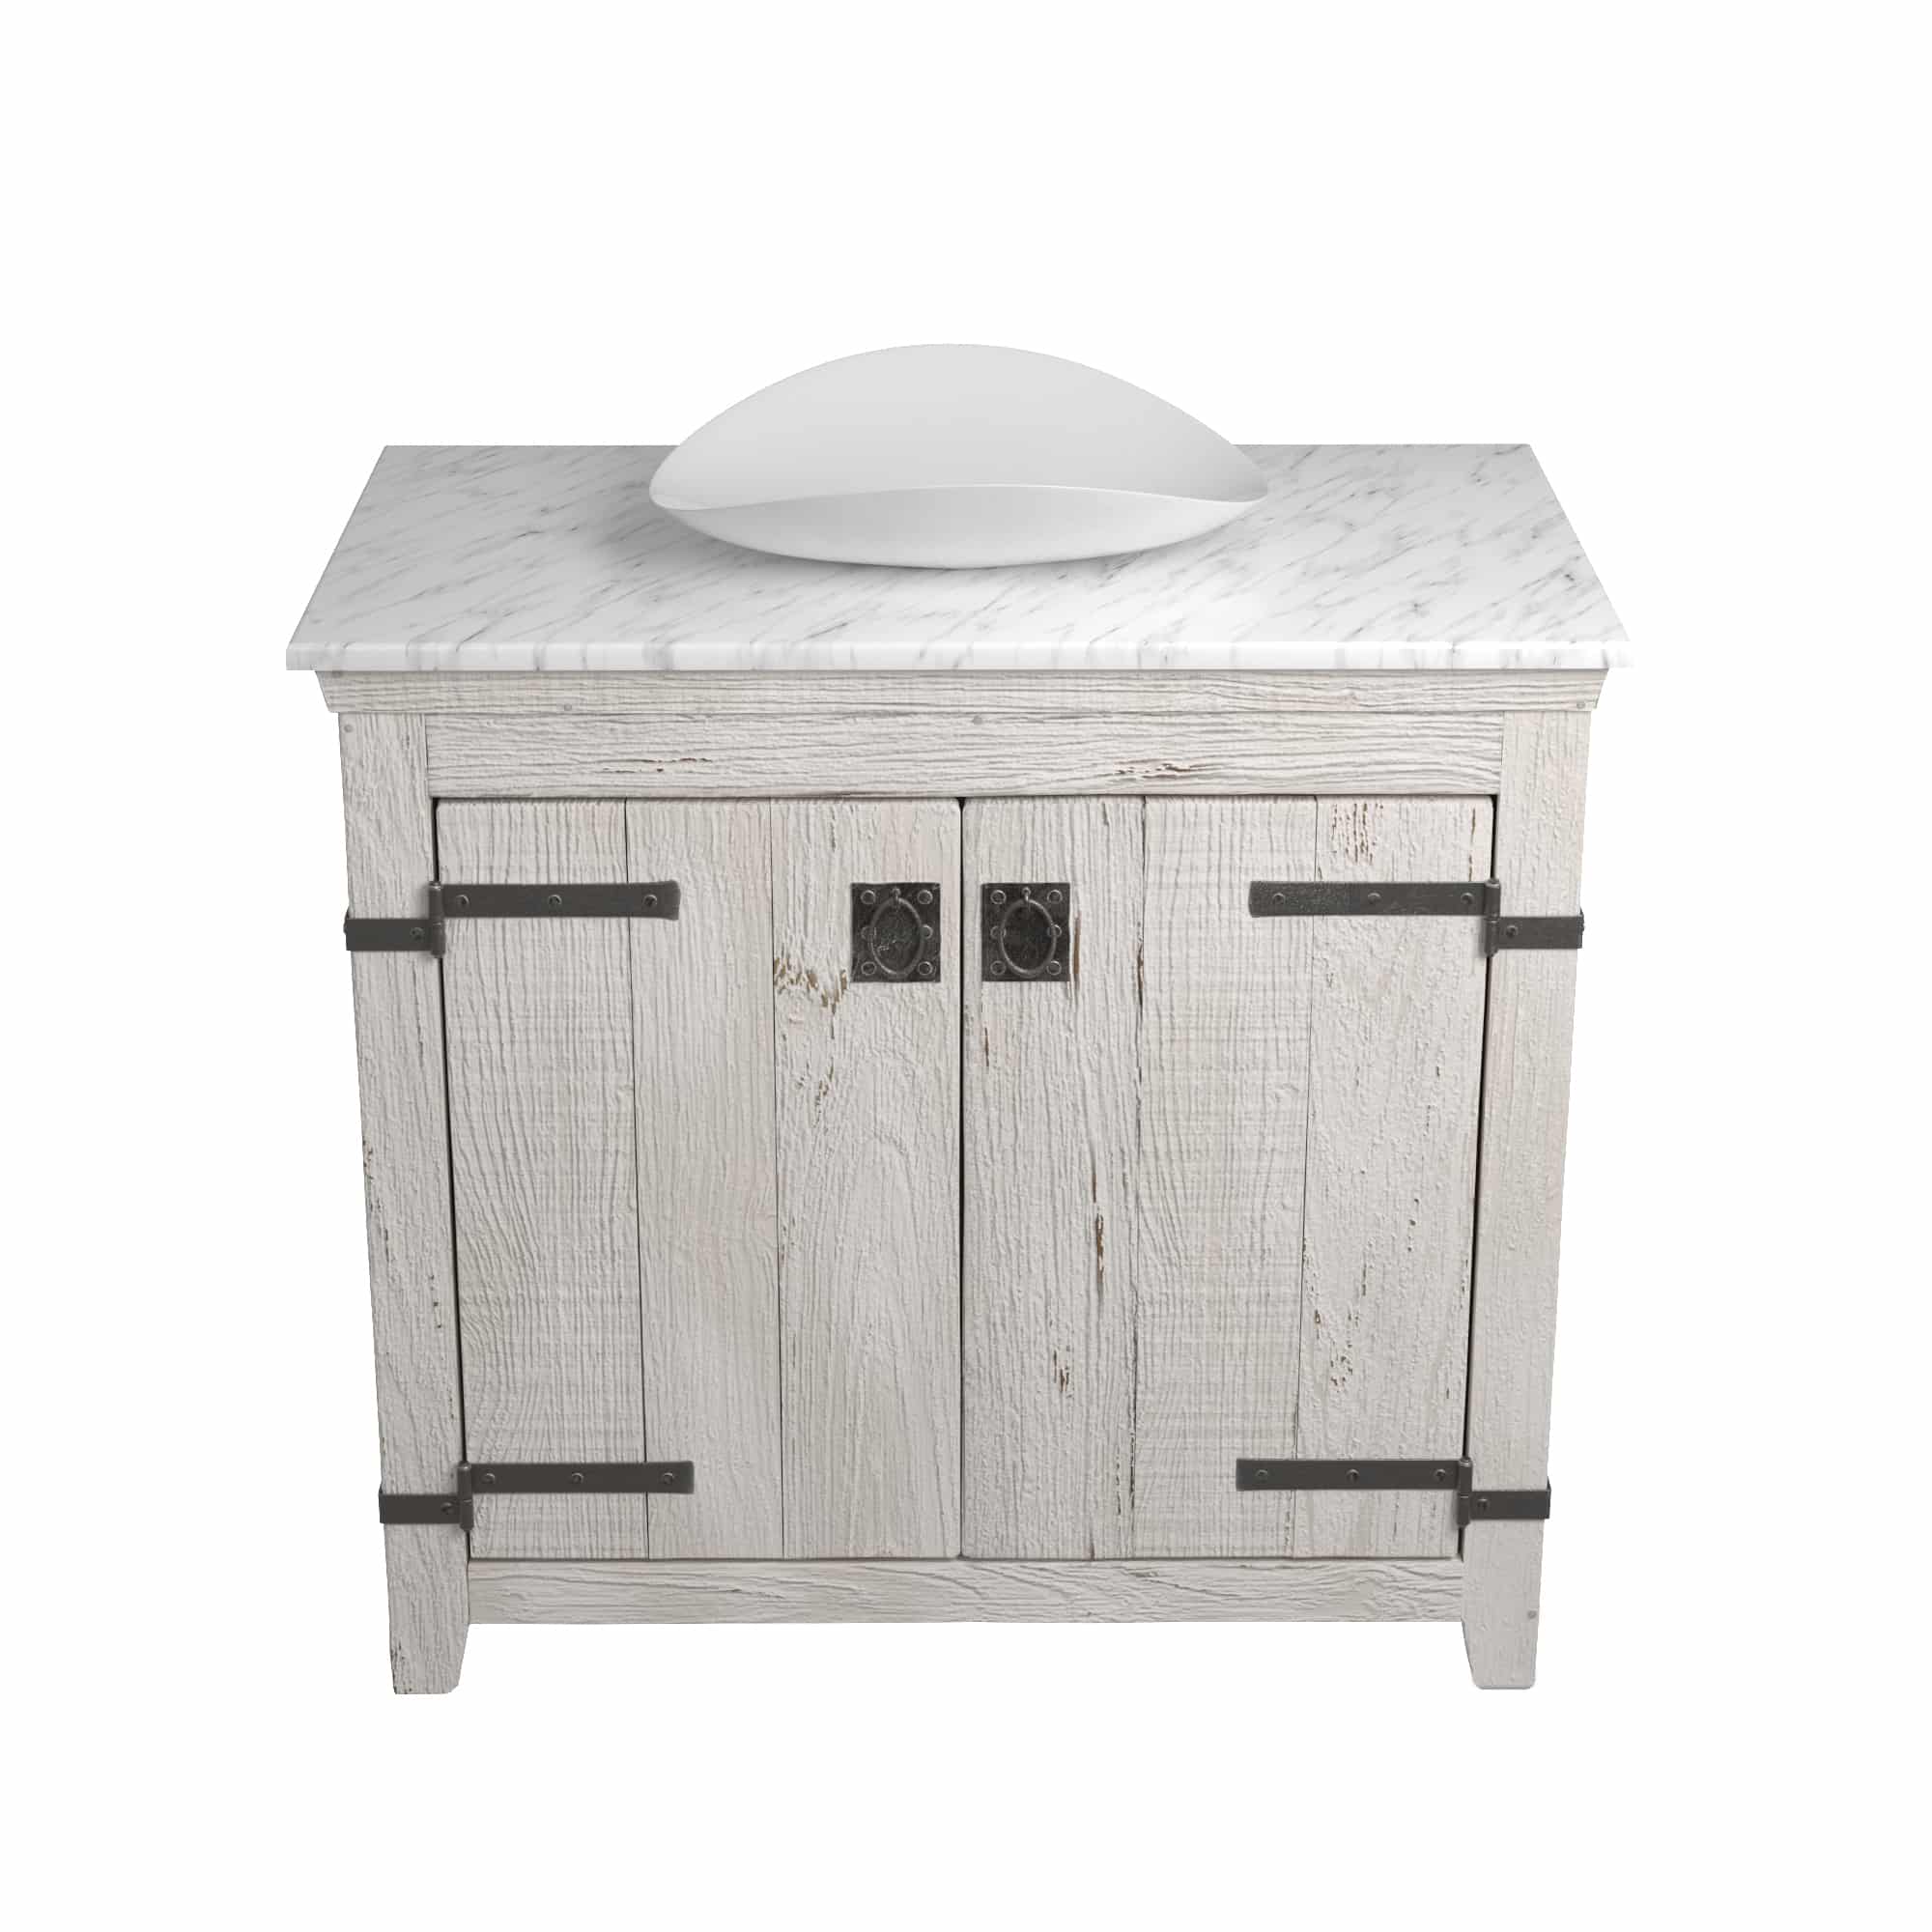 Native Trails 36" Americana Vanity in Whitewash with Carrara Marble Top and Sorrento in Bianco, No Faucet Hole, BND36-VB-CT-MG-098